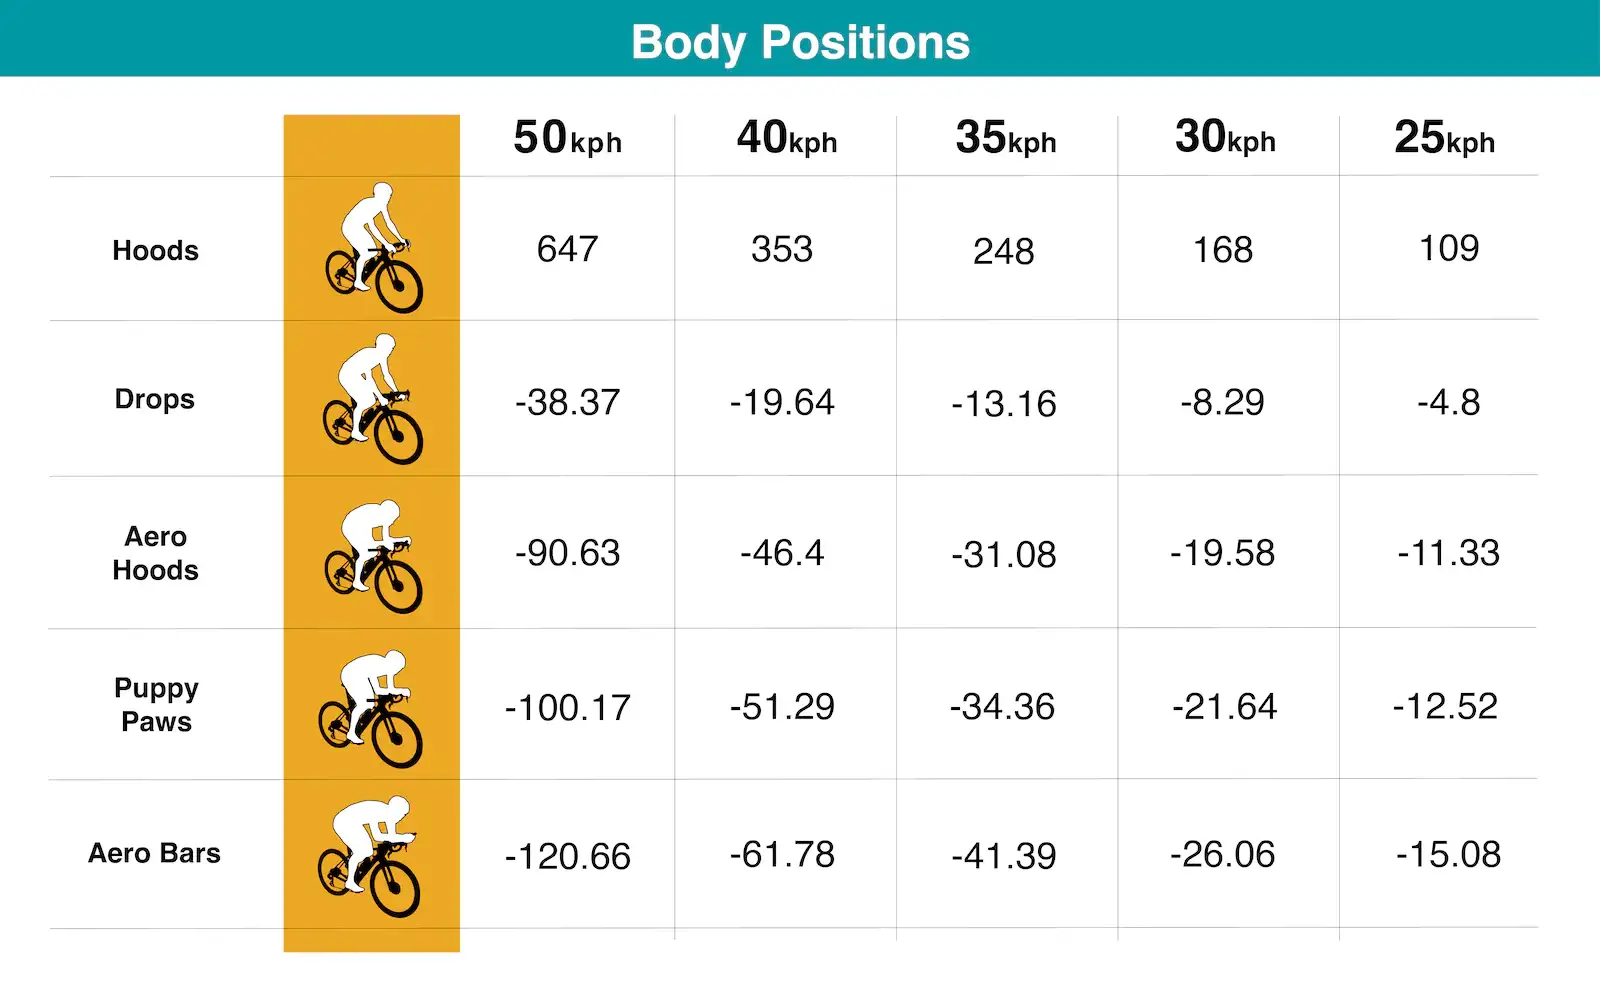 Power savings with body positions versus speed, by Silca.